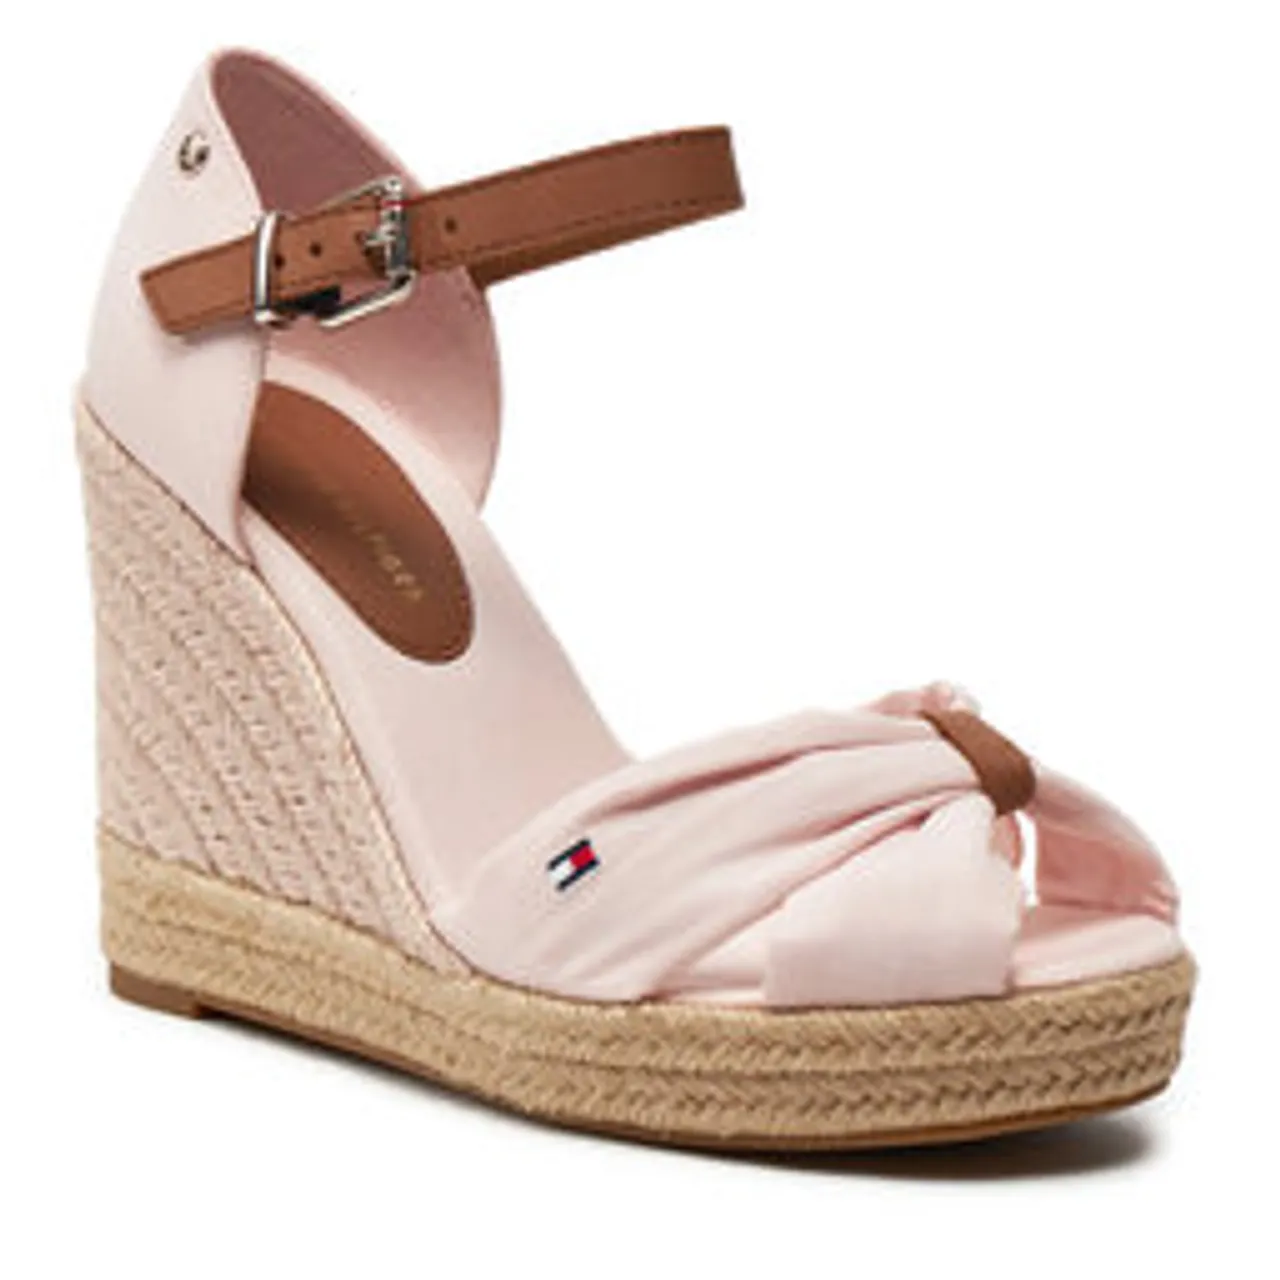 Espadrilles Tommy Hilfiger FW0FW04784 Whimsy Pink TJQ